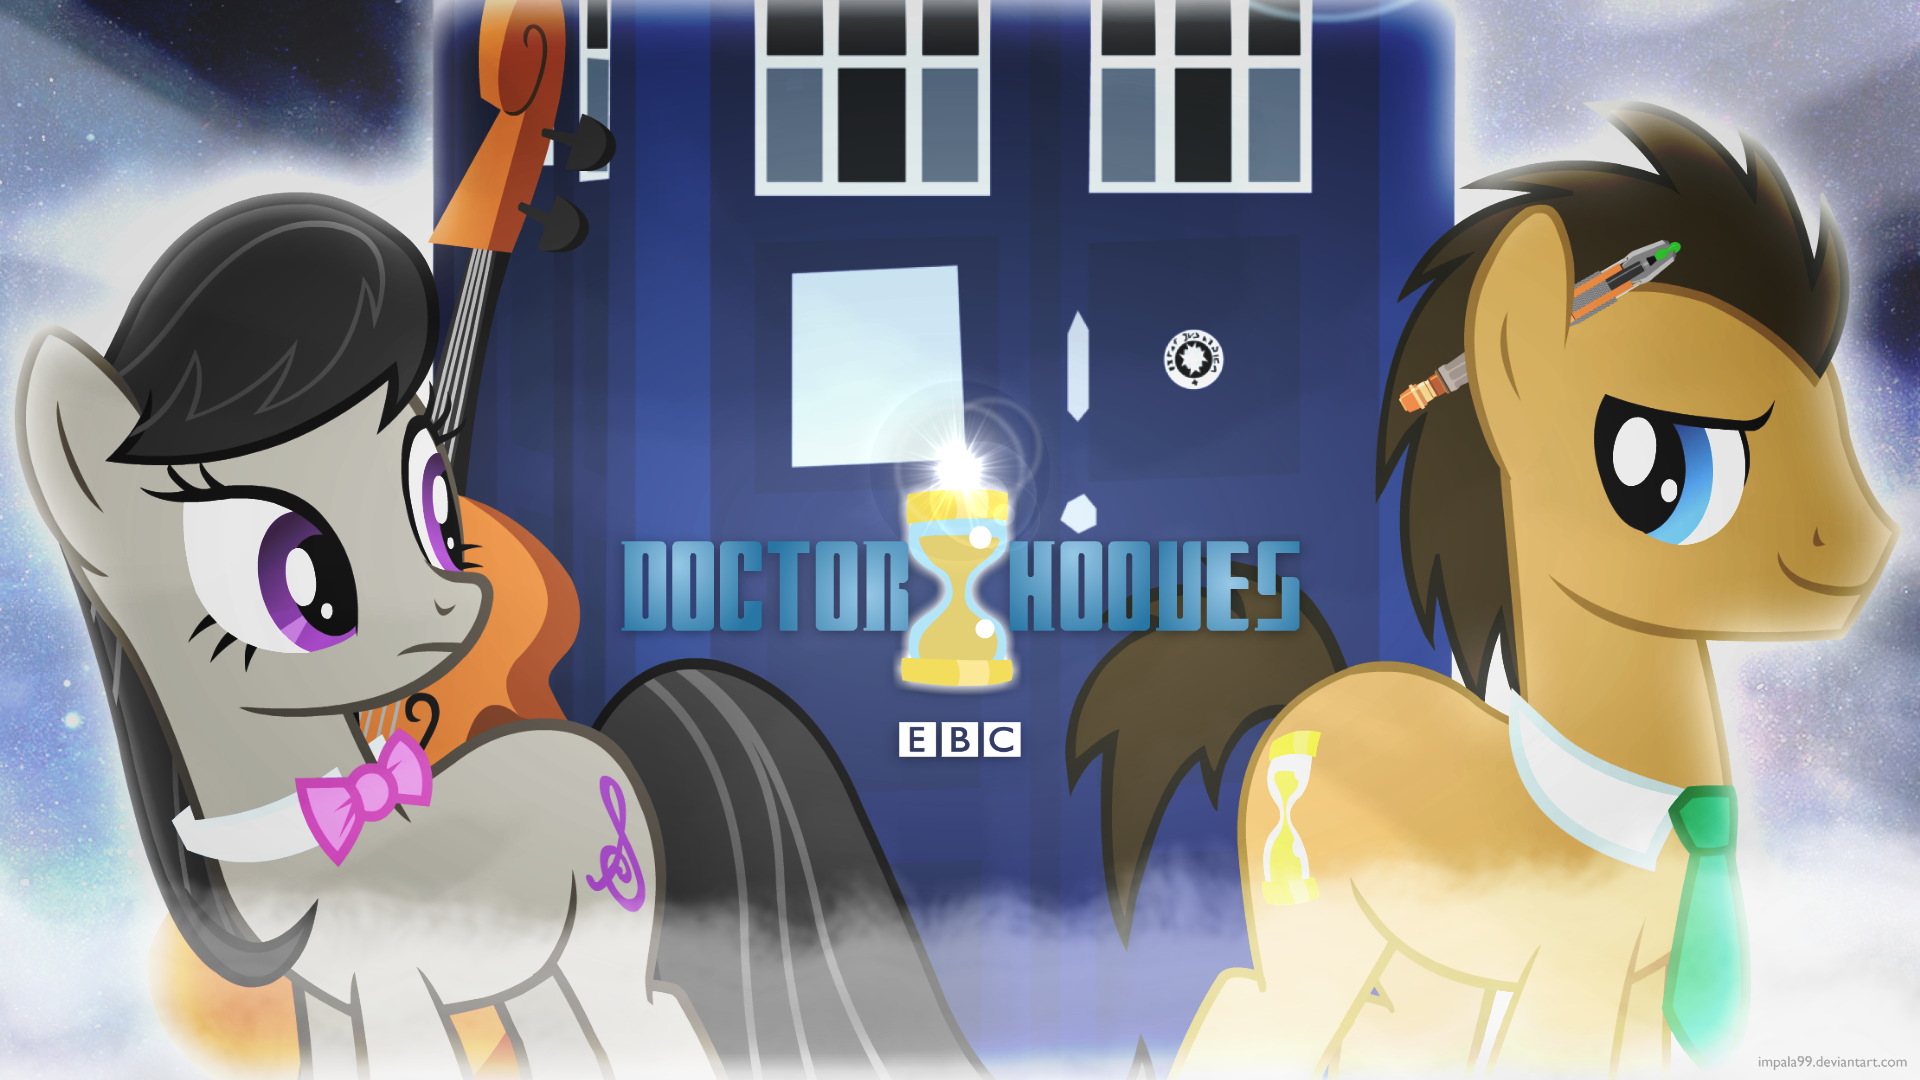 Doctor Hooves by impala99 and TheEvilFlashAnimator